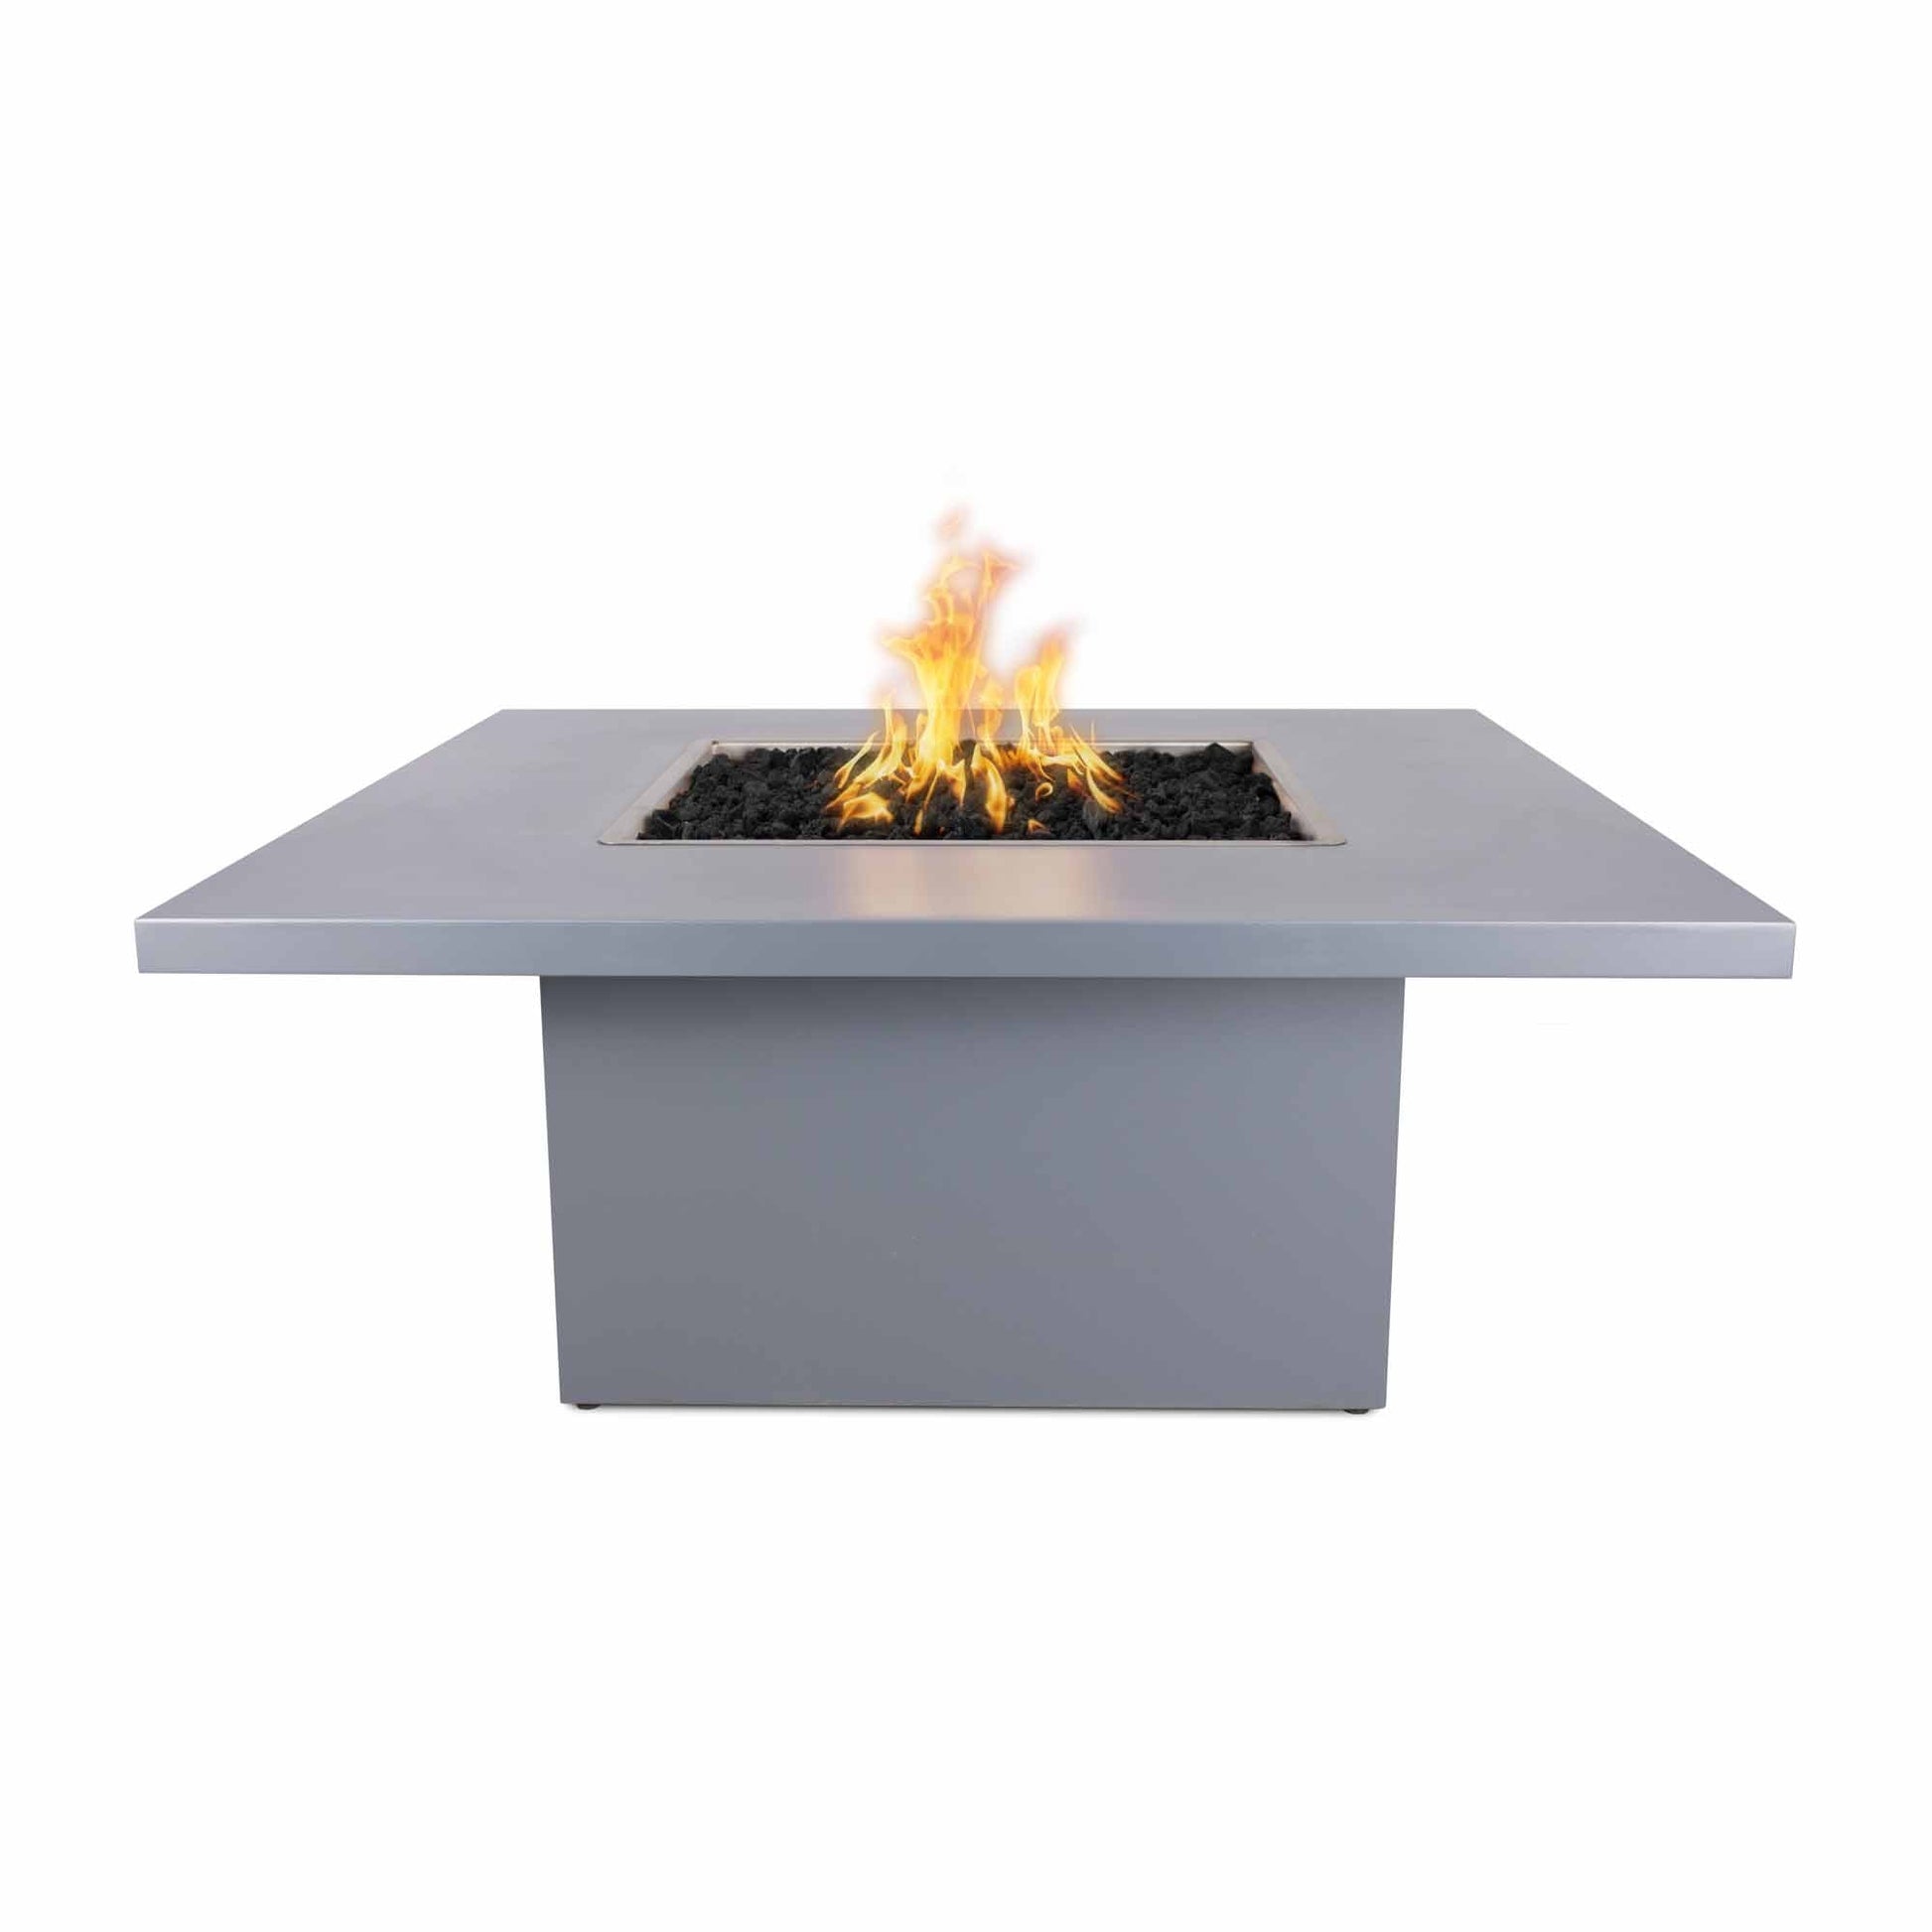 The Outdoor Plus Square Bella 36" Hammered Copper Natural Gas Fire Pit with Flame Sense with Spark Ignition